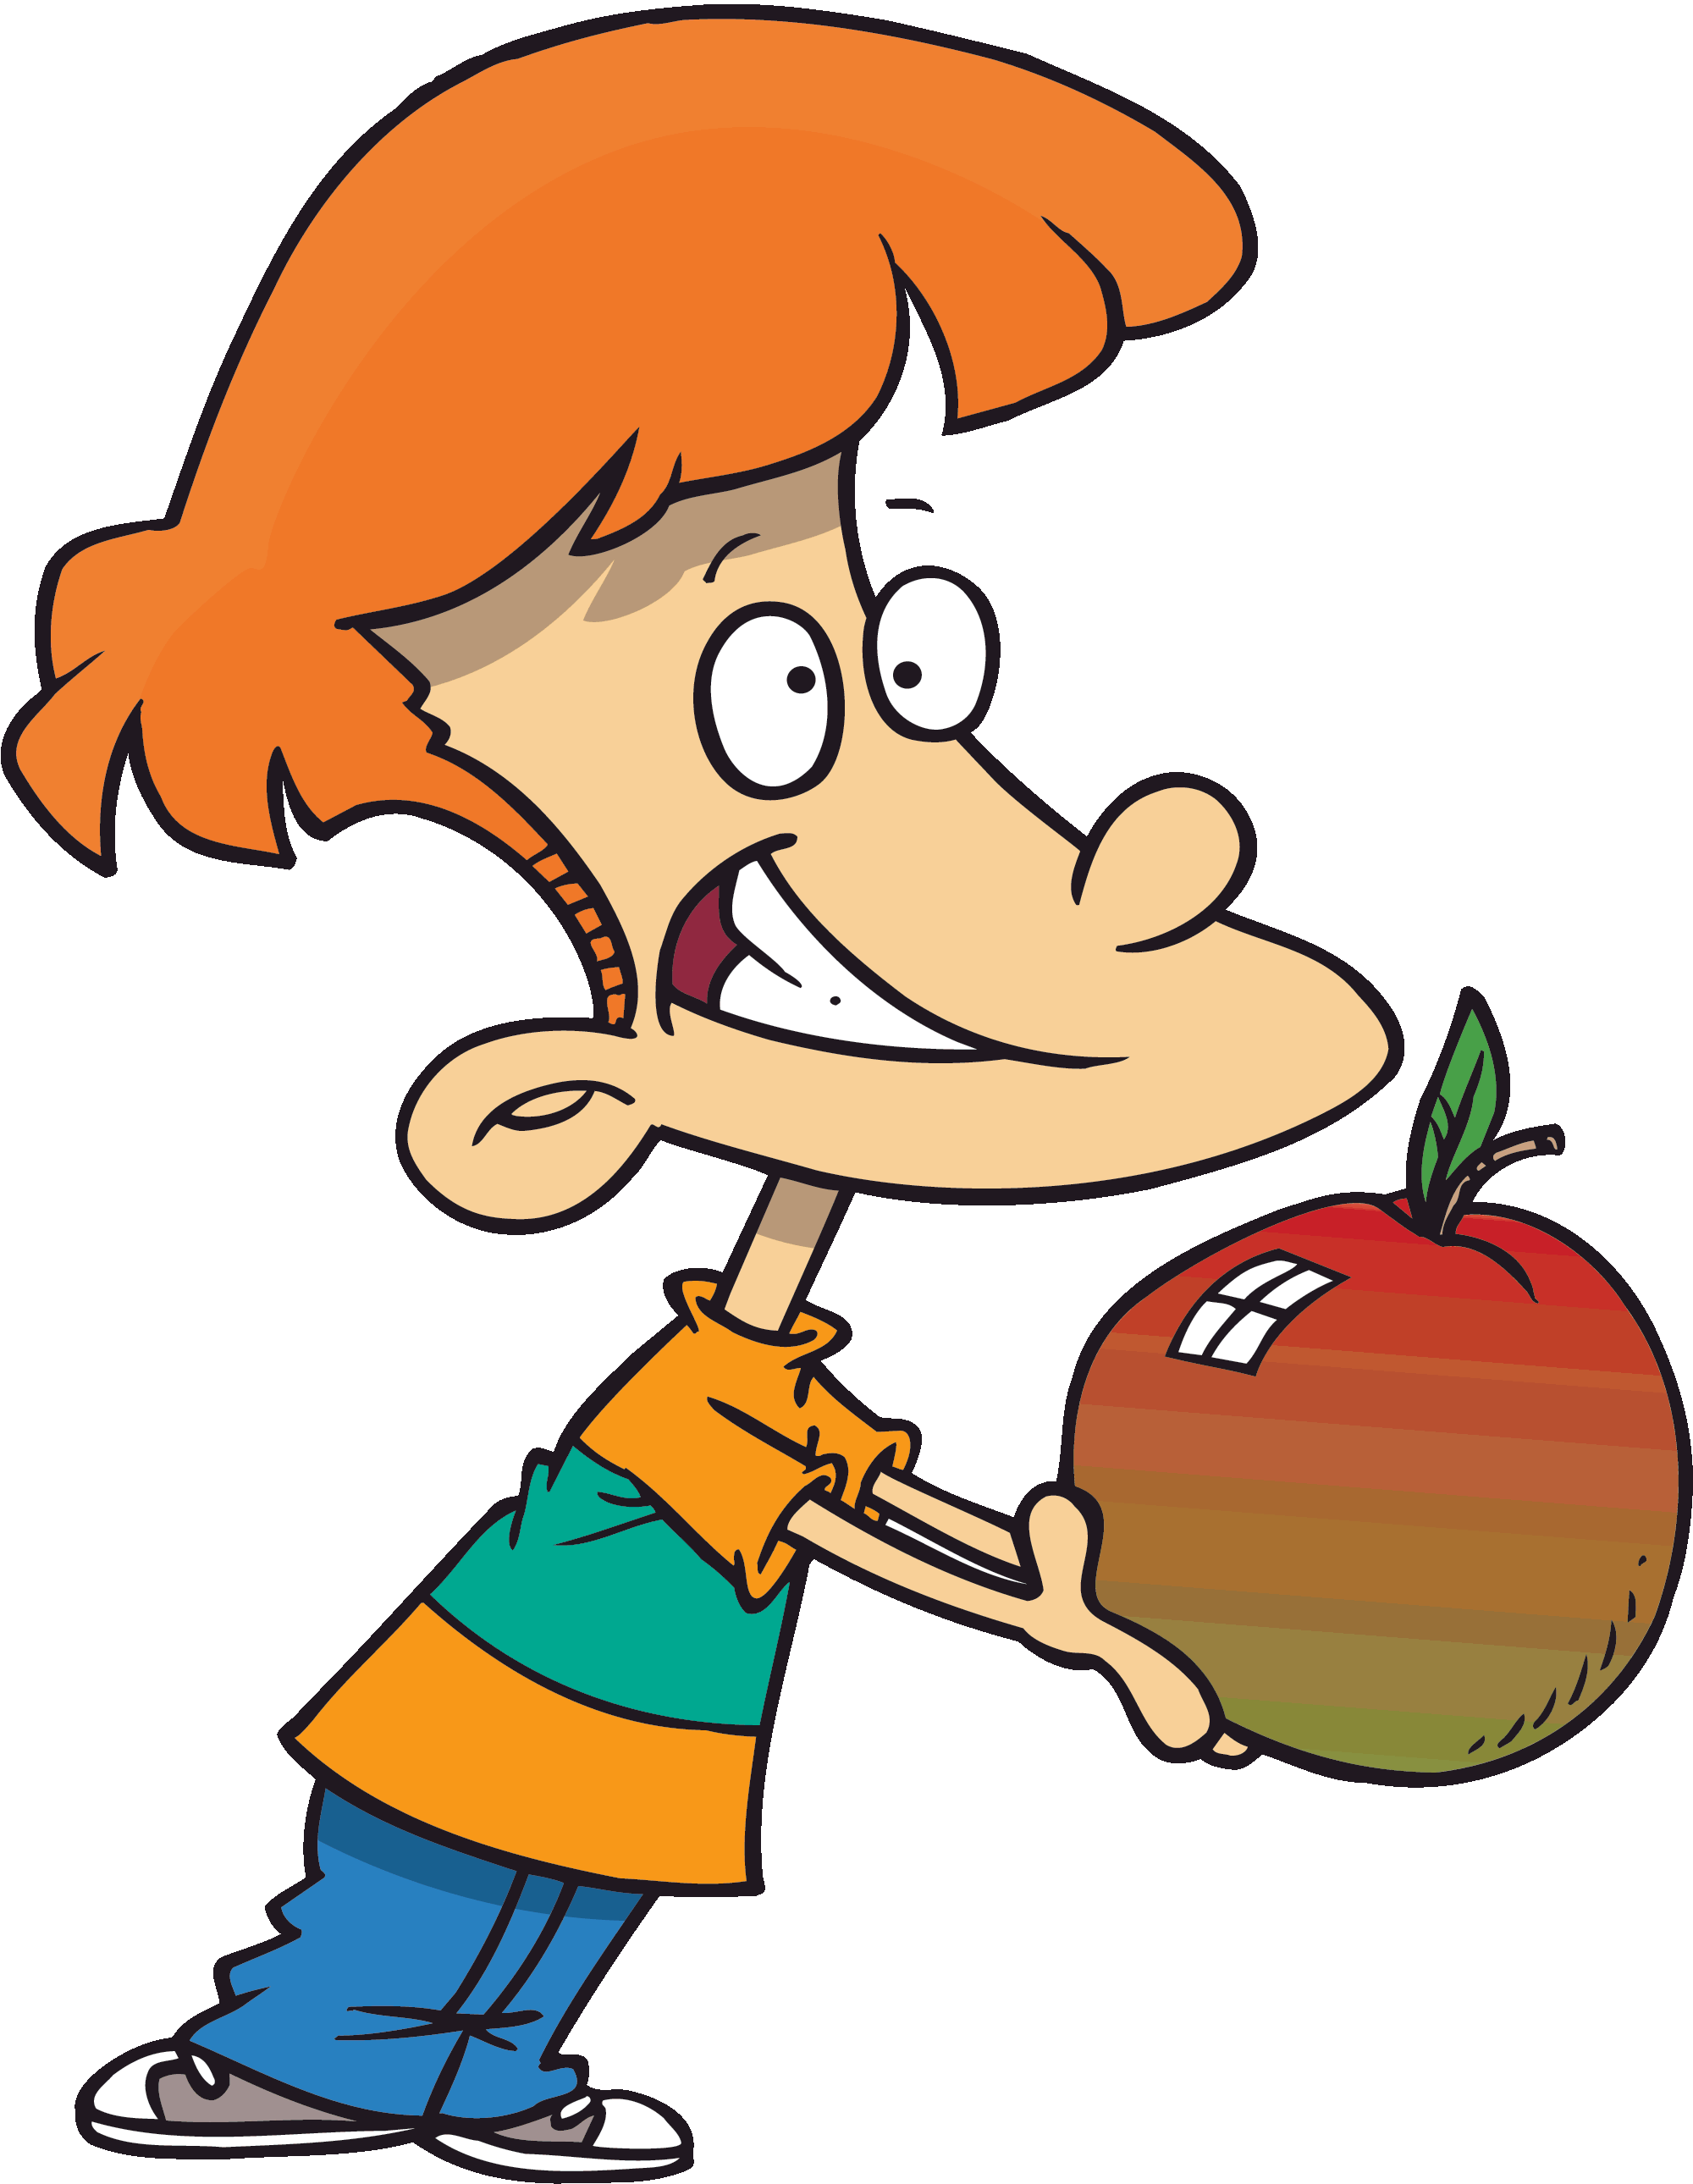 Apple picking at getdrawings. Ladder clipart boy